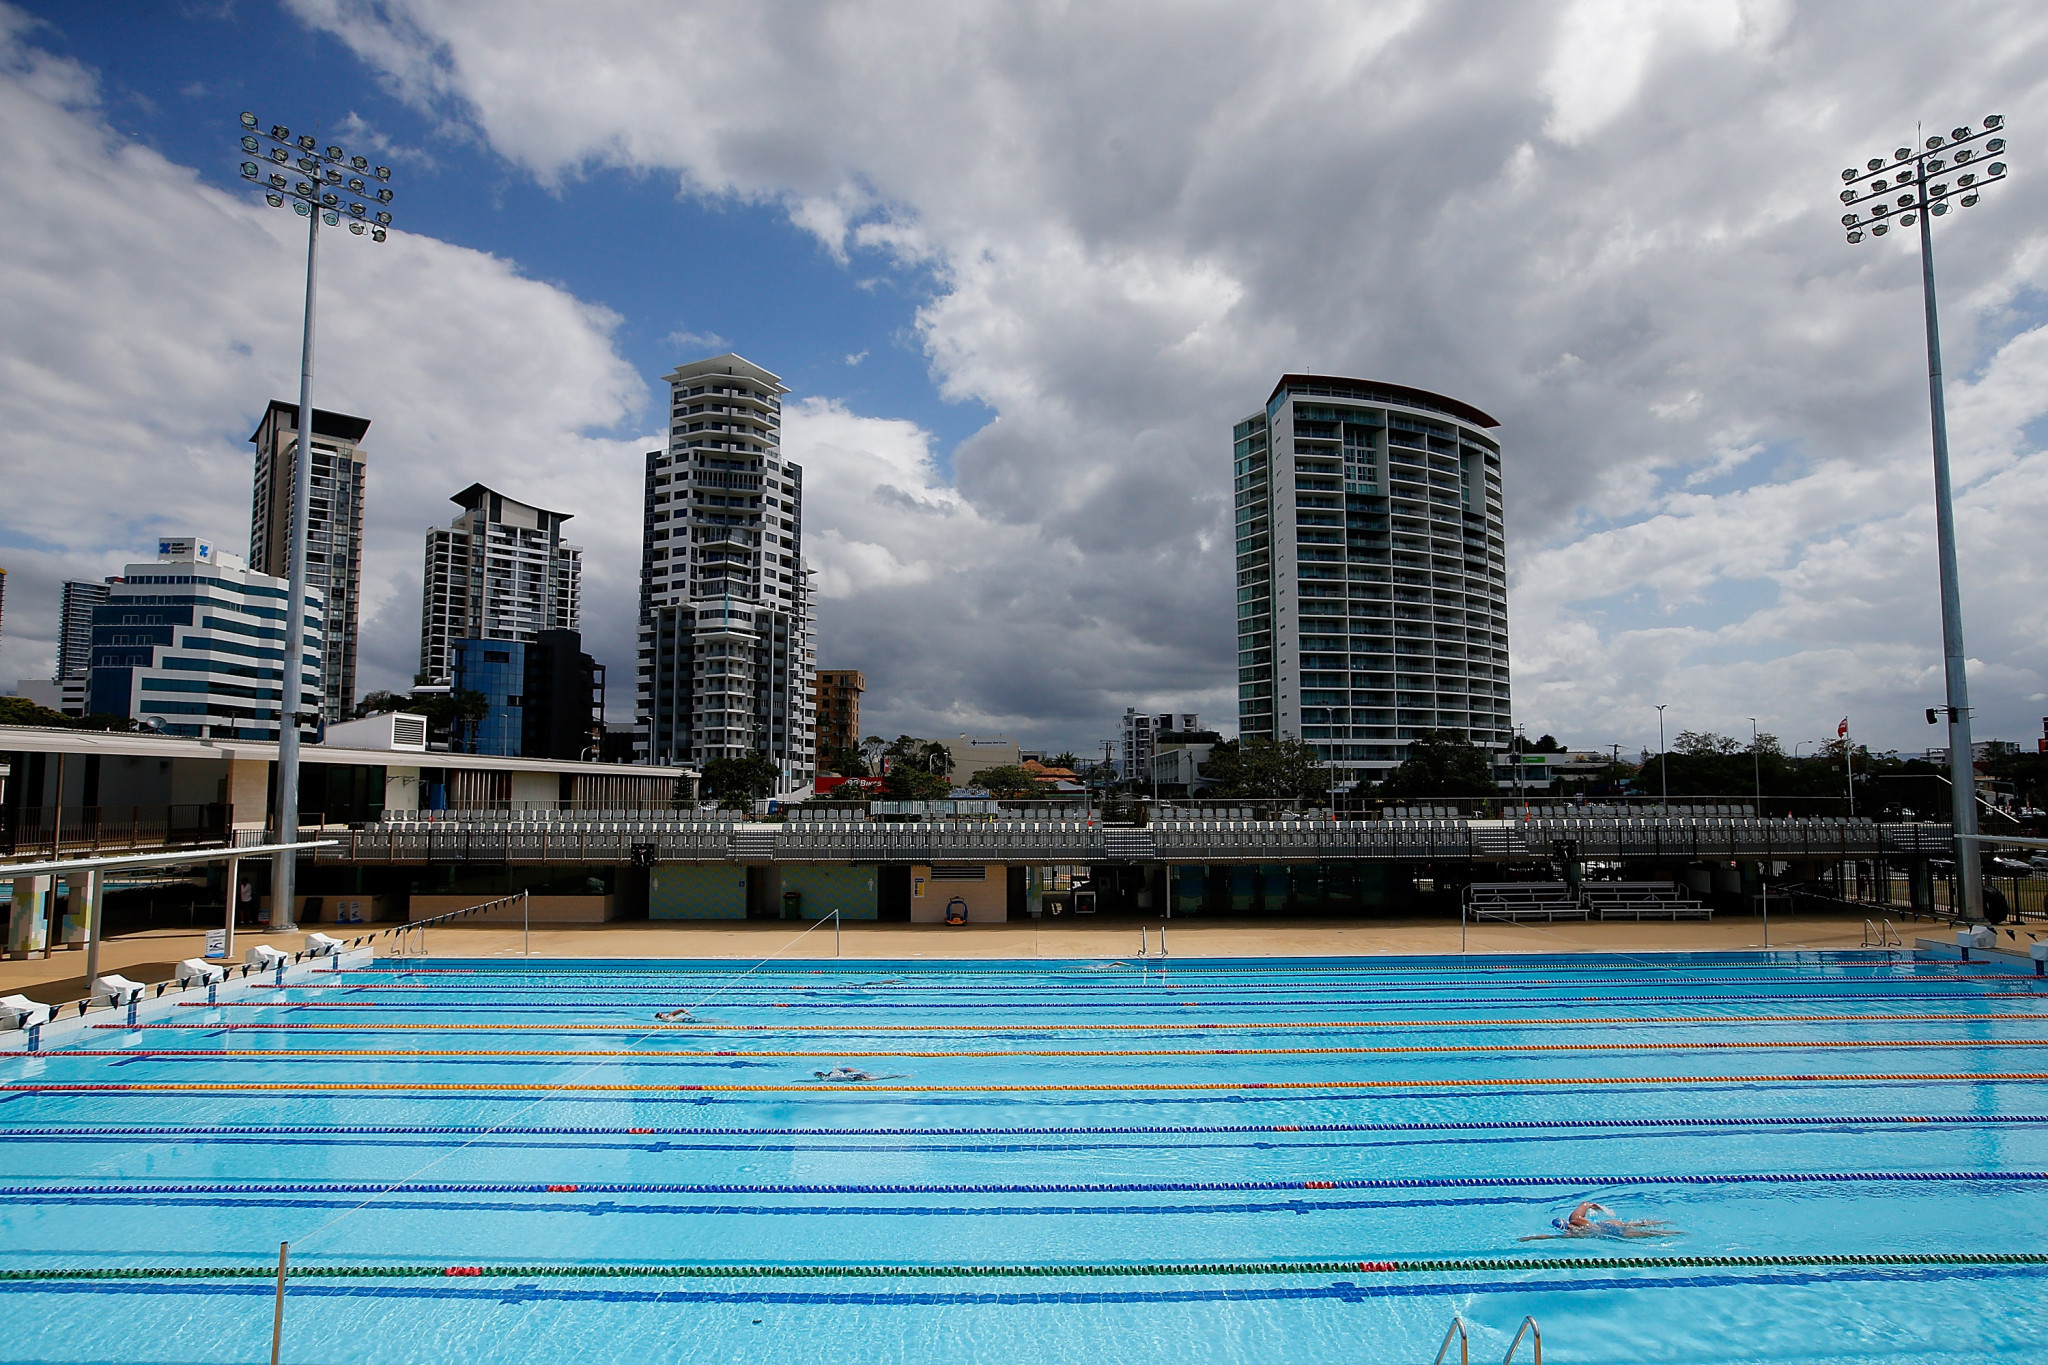 The M1 in Brisbane has had speed reductions imposed ahead of the Gold Coast 2018 Games in order to improve traffic flow ©Getty Images